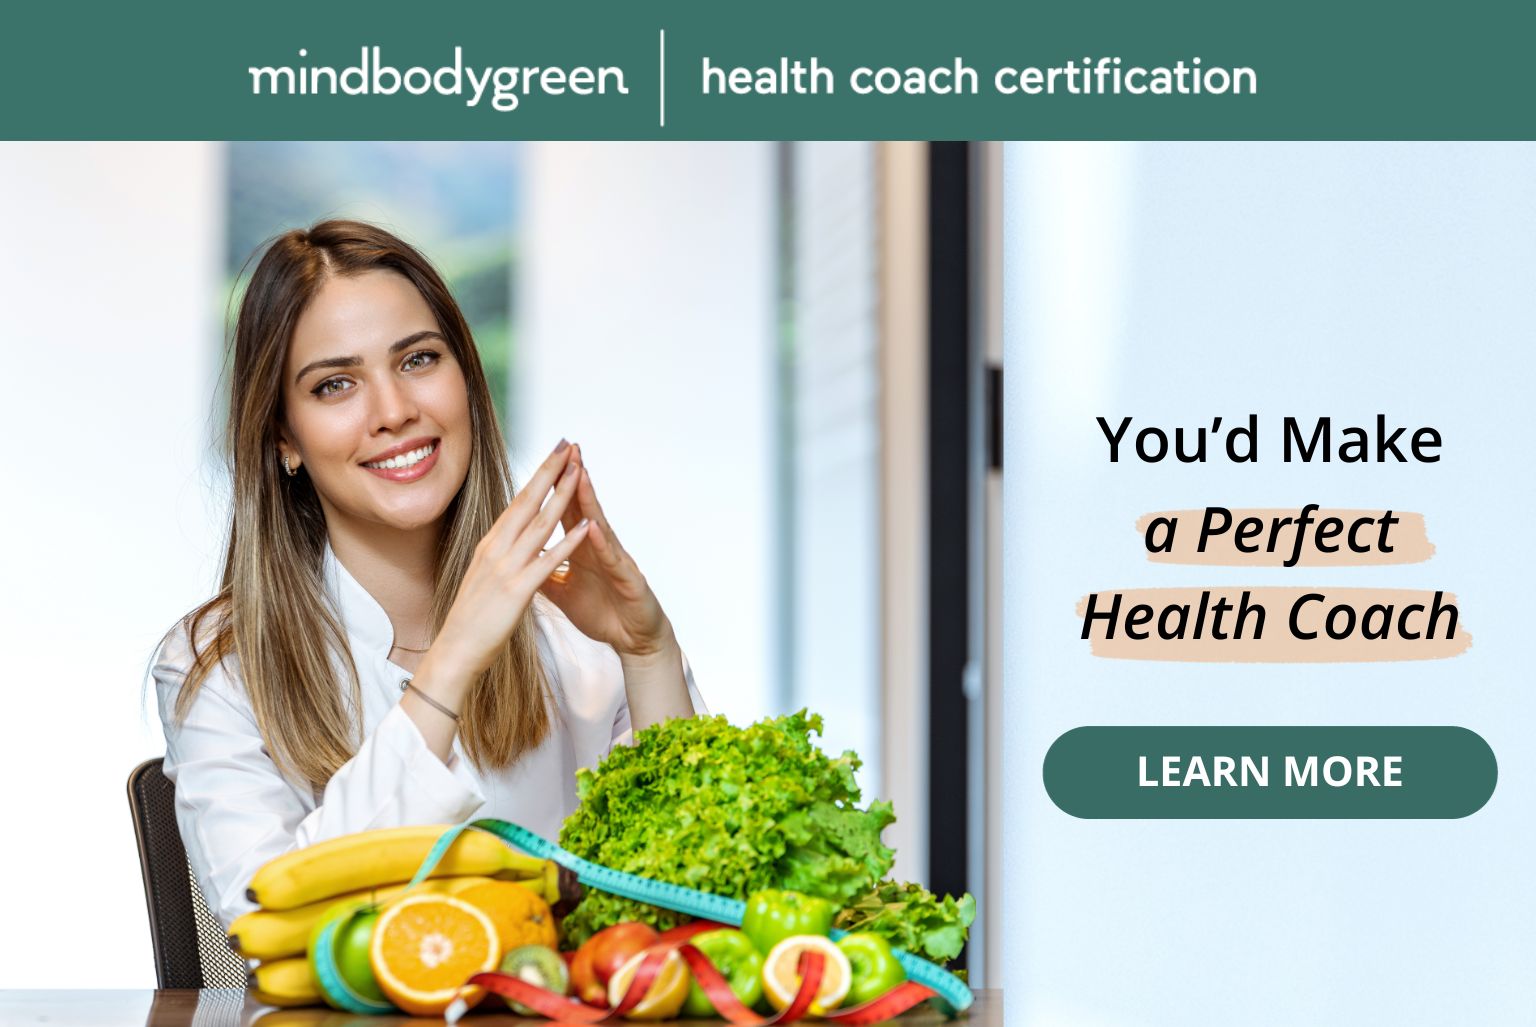 Click here to find out more about the MindBodyGreen Health Coach Certification